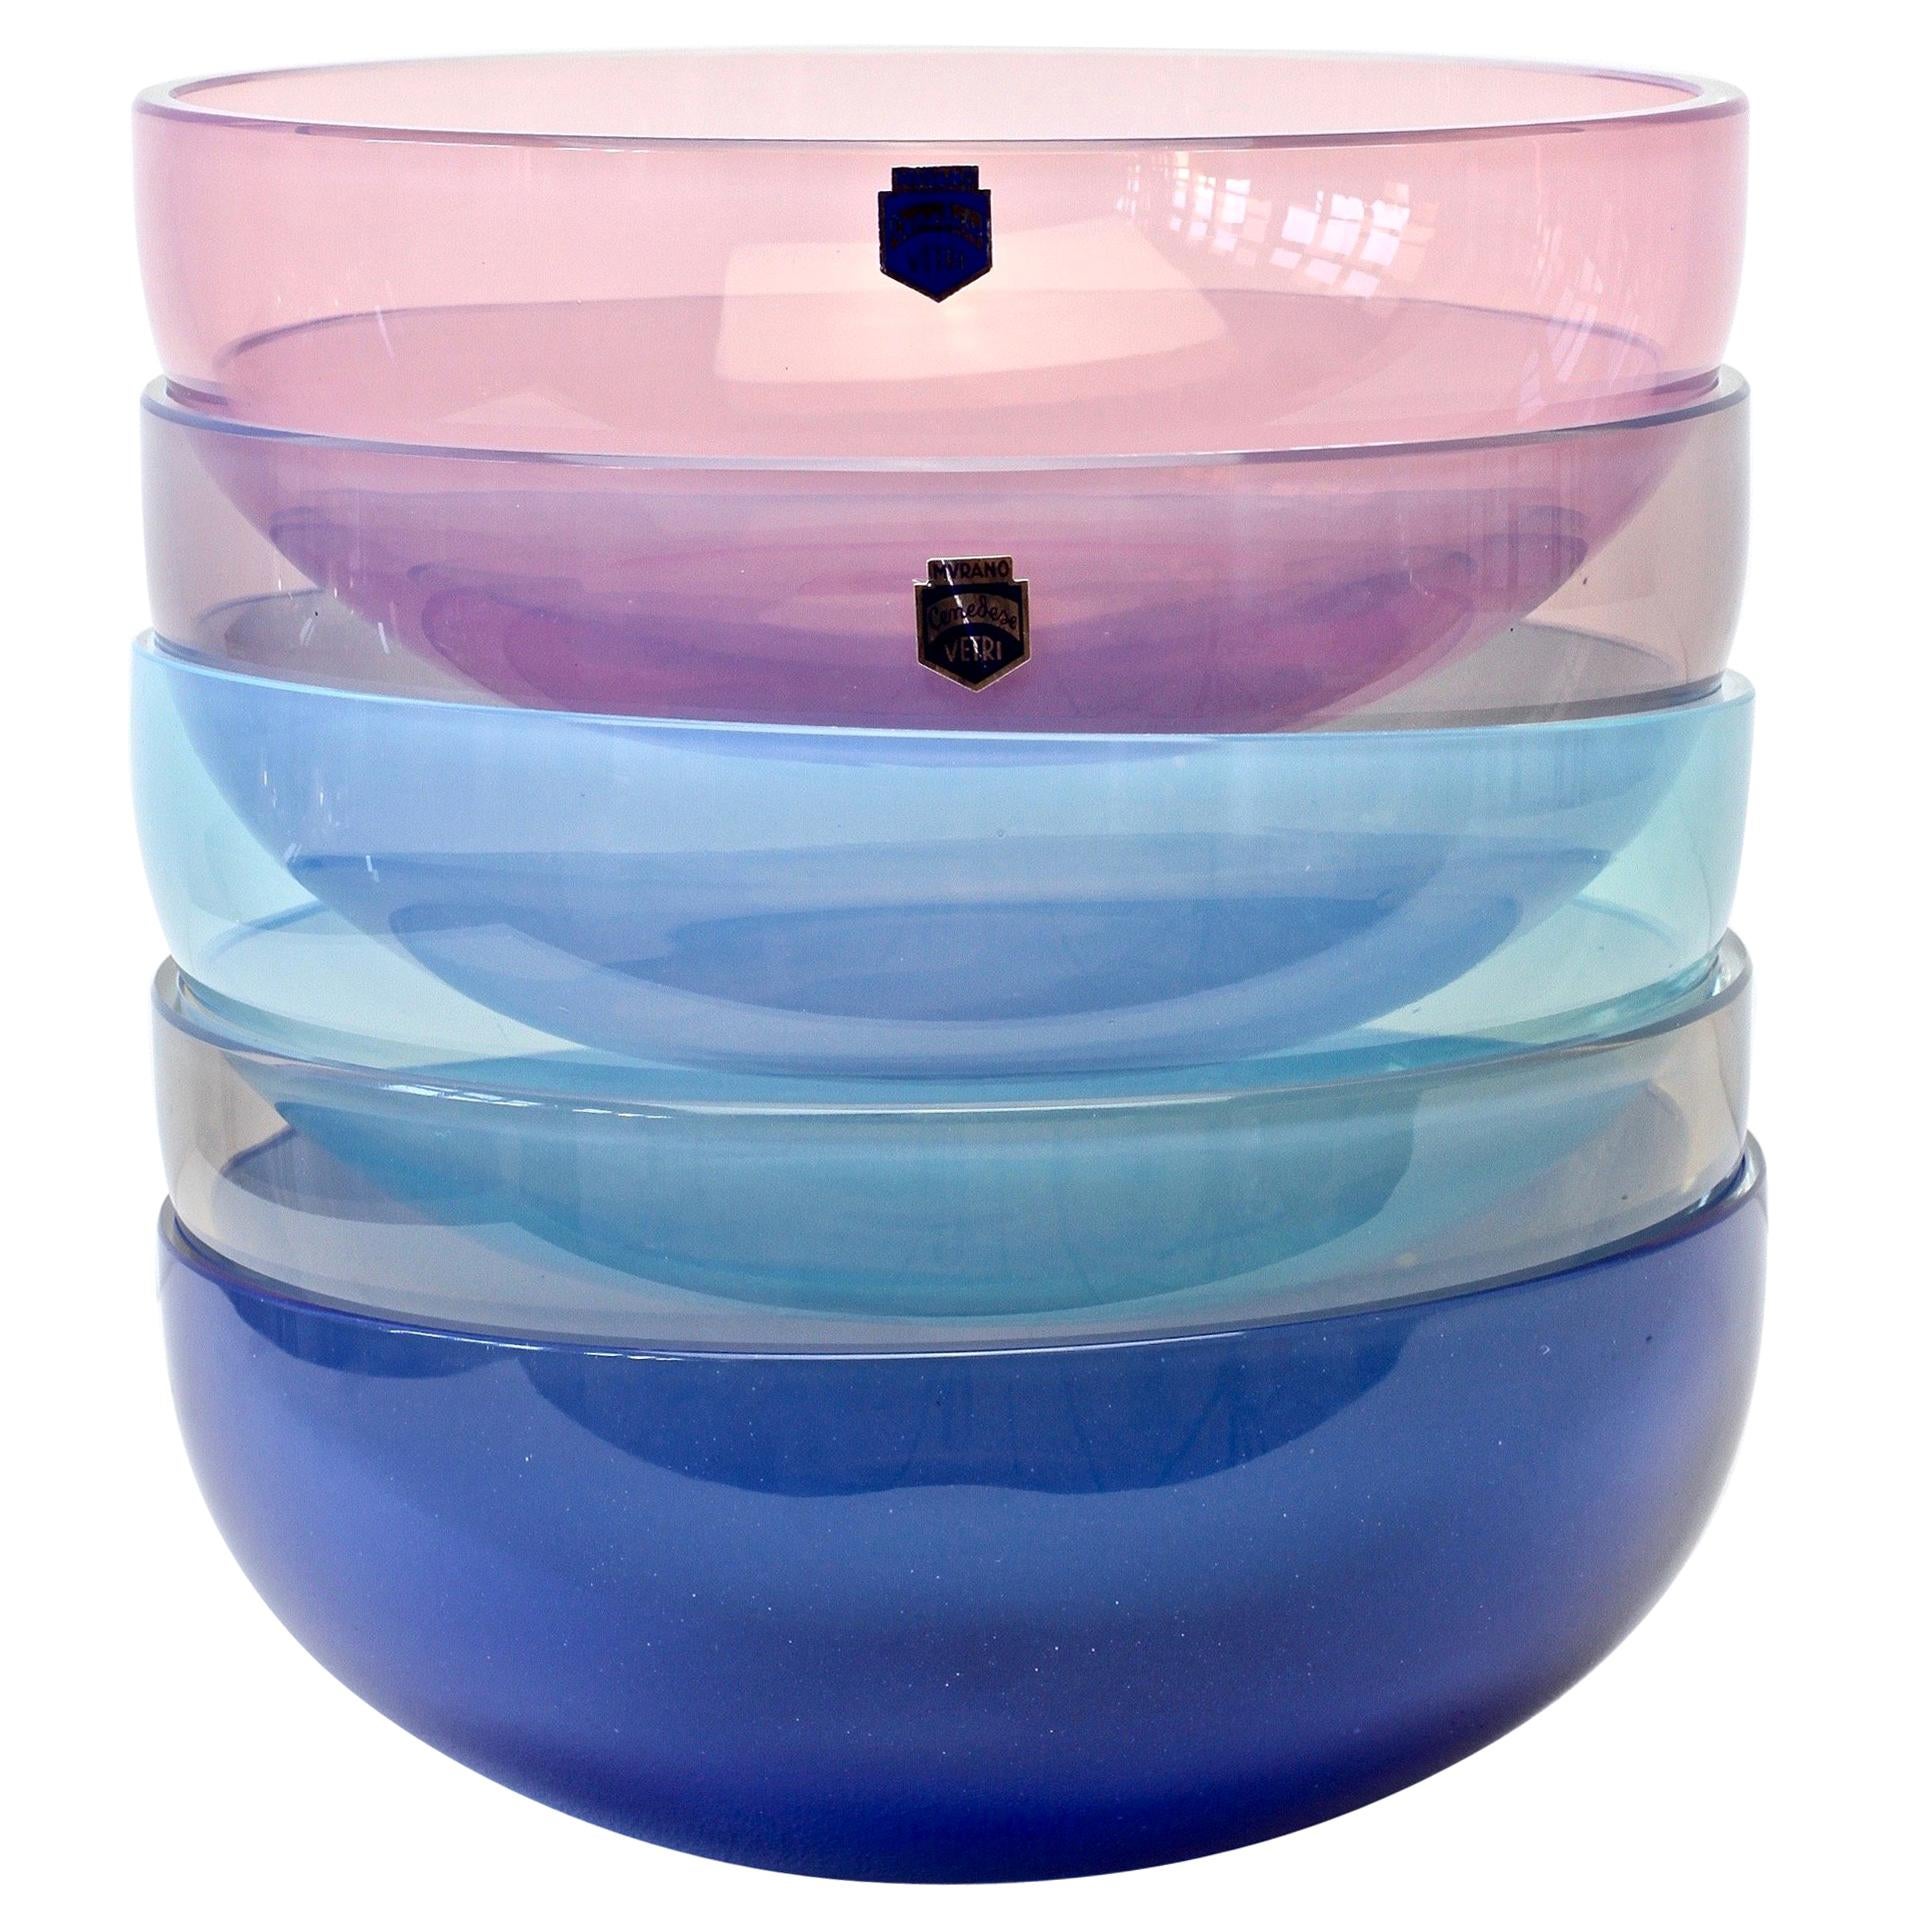 Antonio da Ros for Cenedese Murano Glass Set of Vibrantly Colored Glass Bowls For Sale